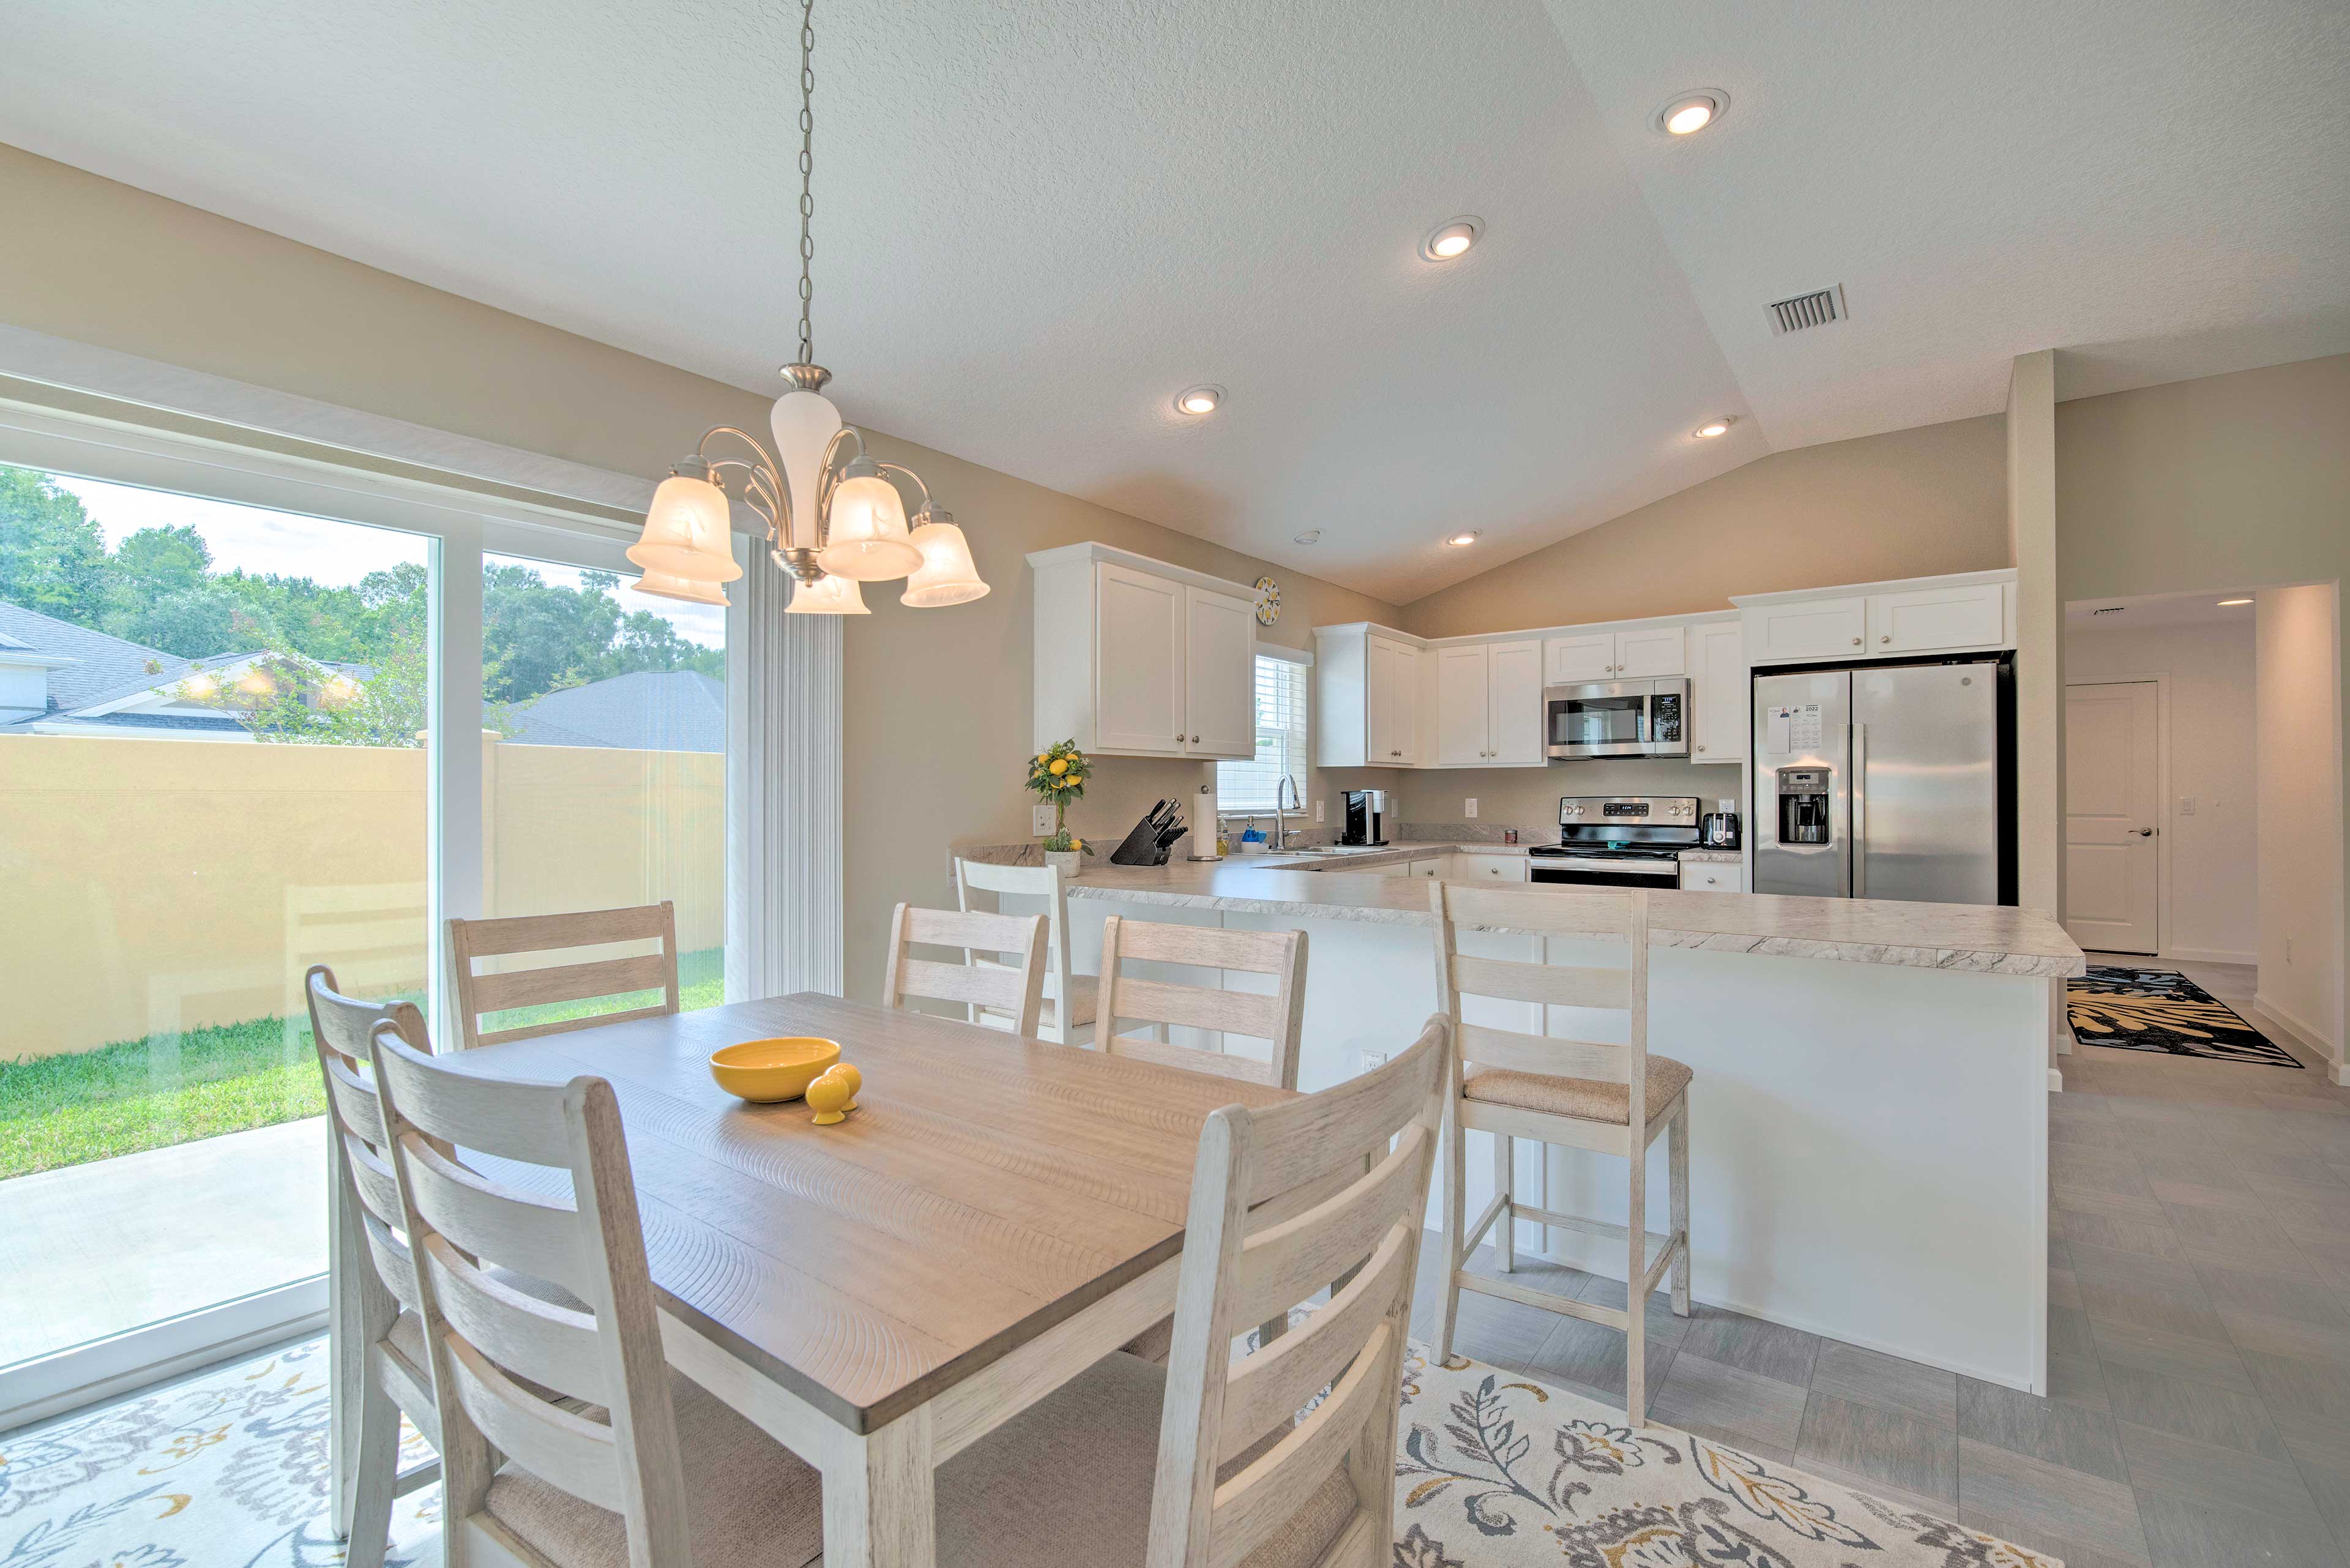 Dining Area | Fully Equipped Kitchen | Dishware + Flatware